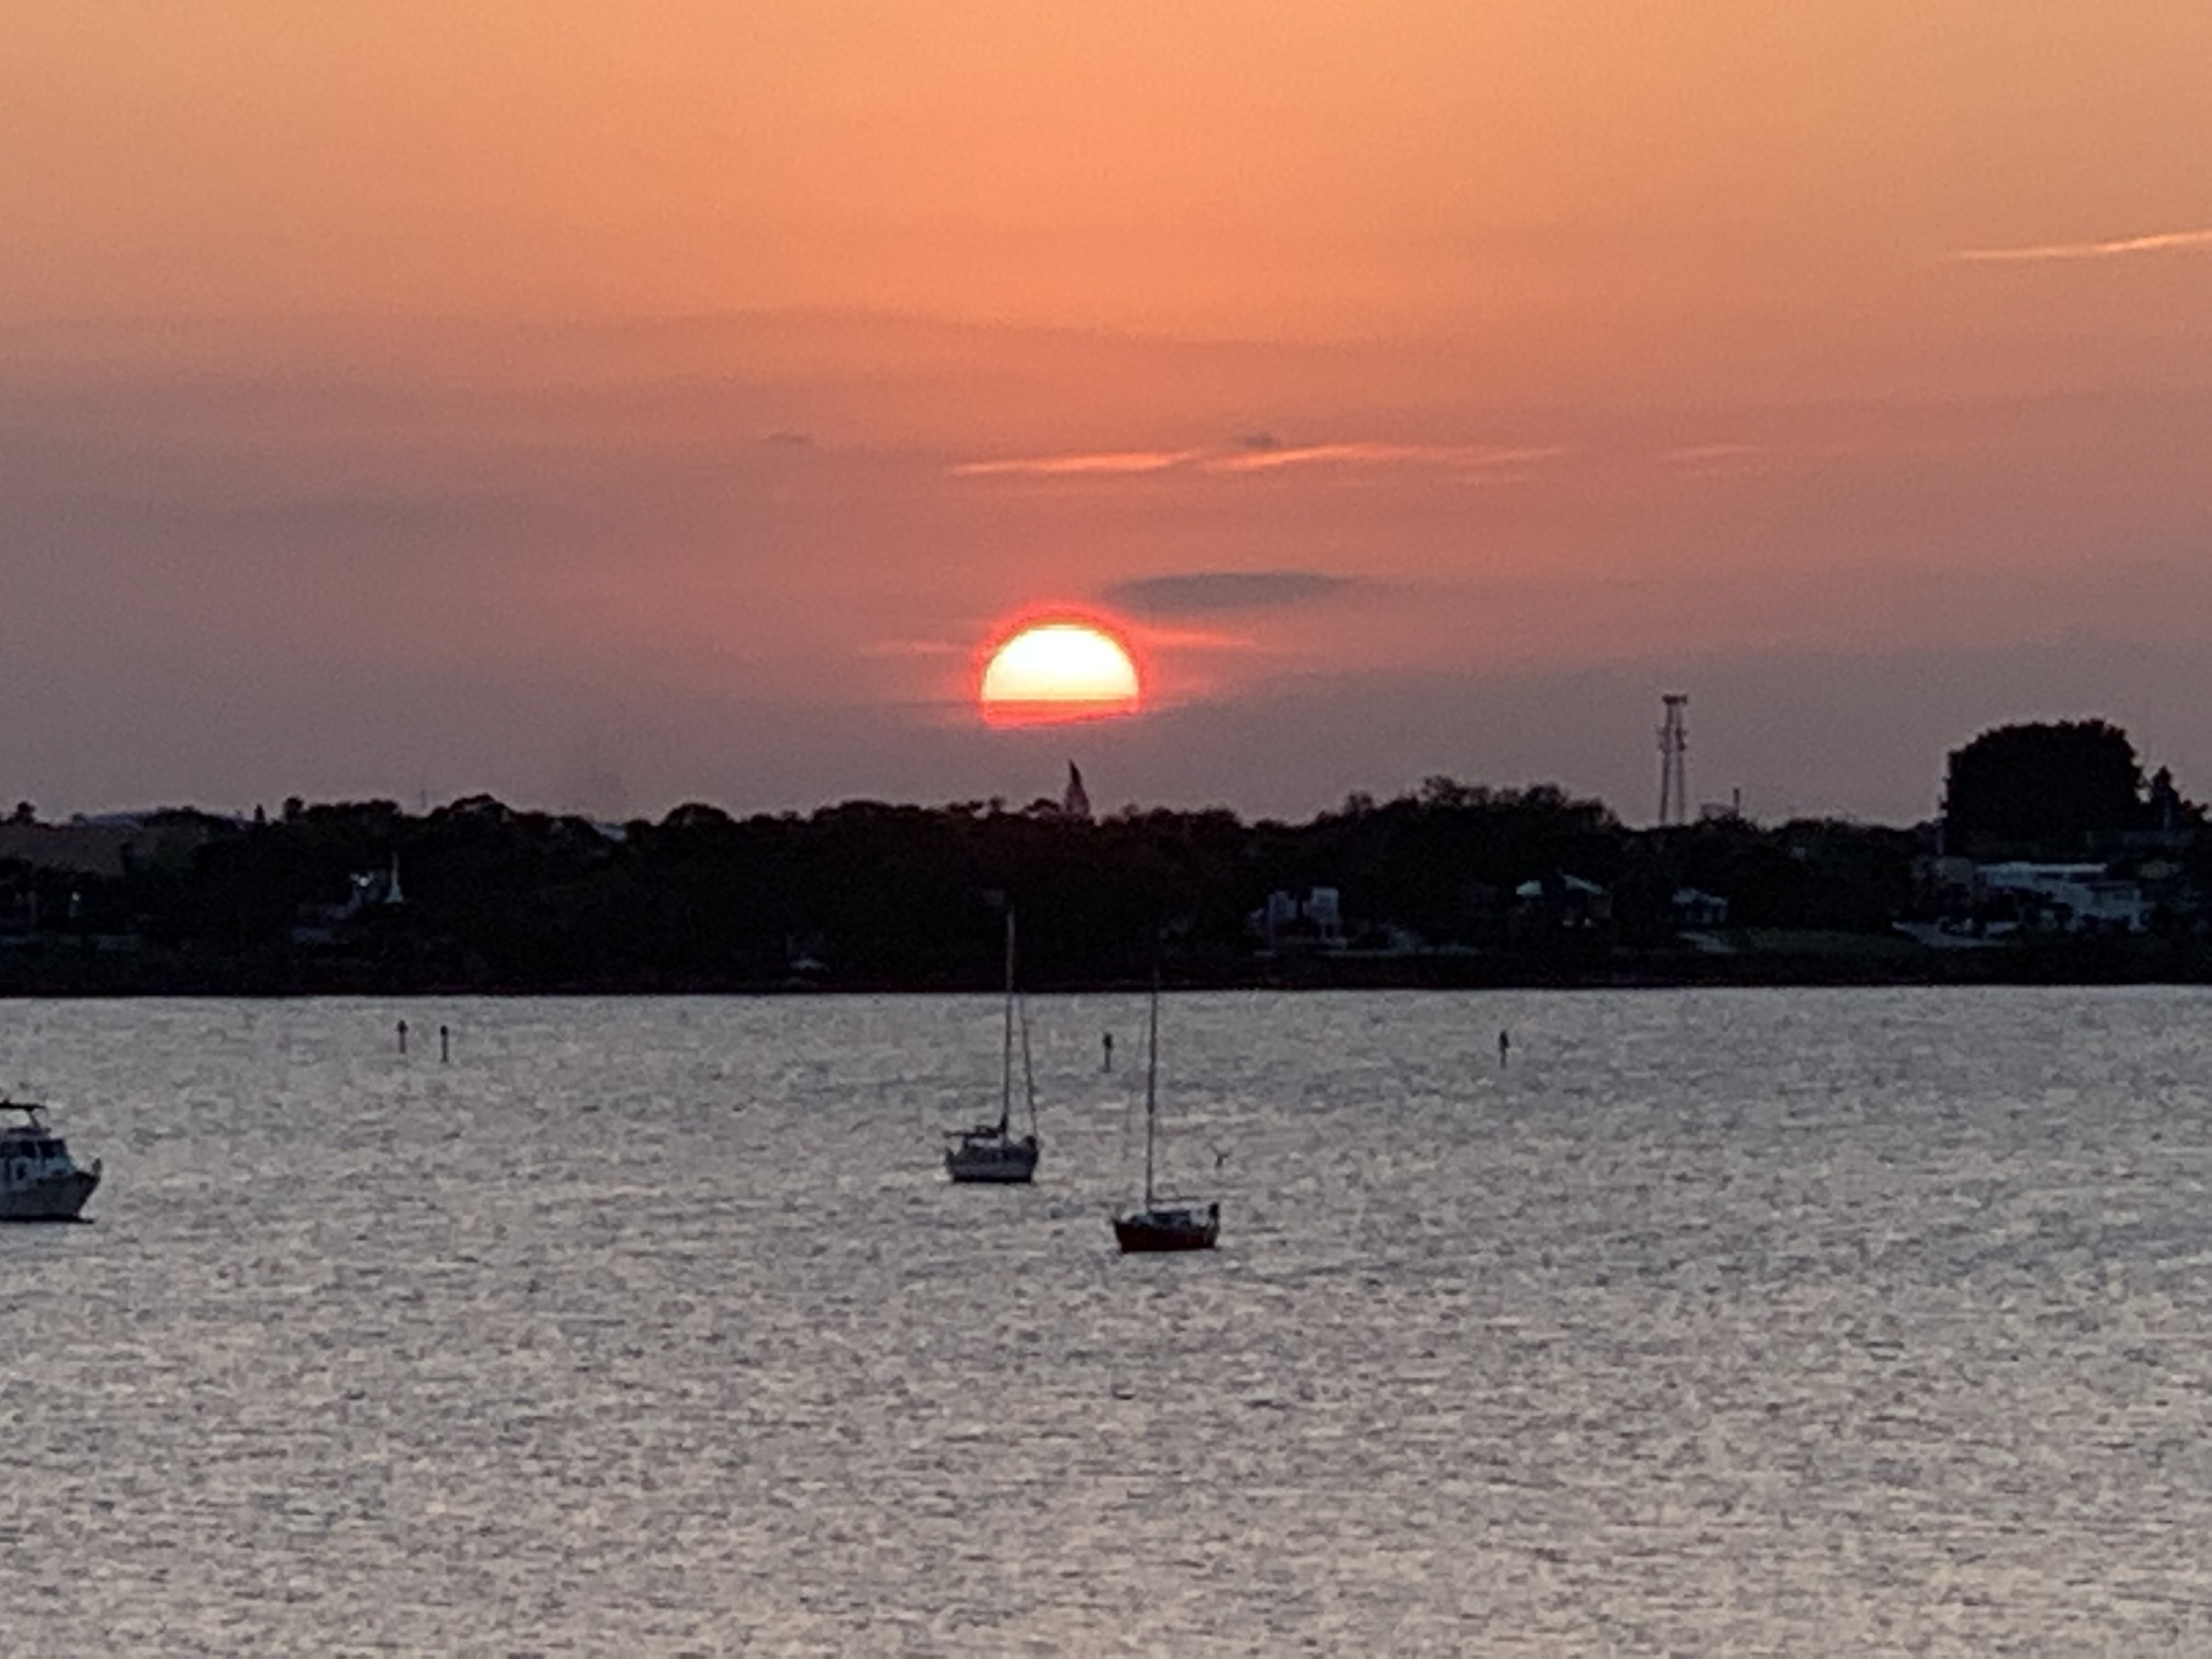 Sailboats on Indian River taken by 480 resident MC (iPhone XS)